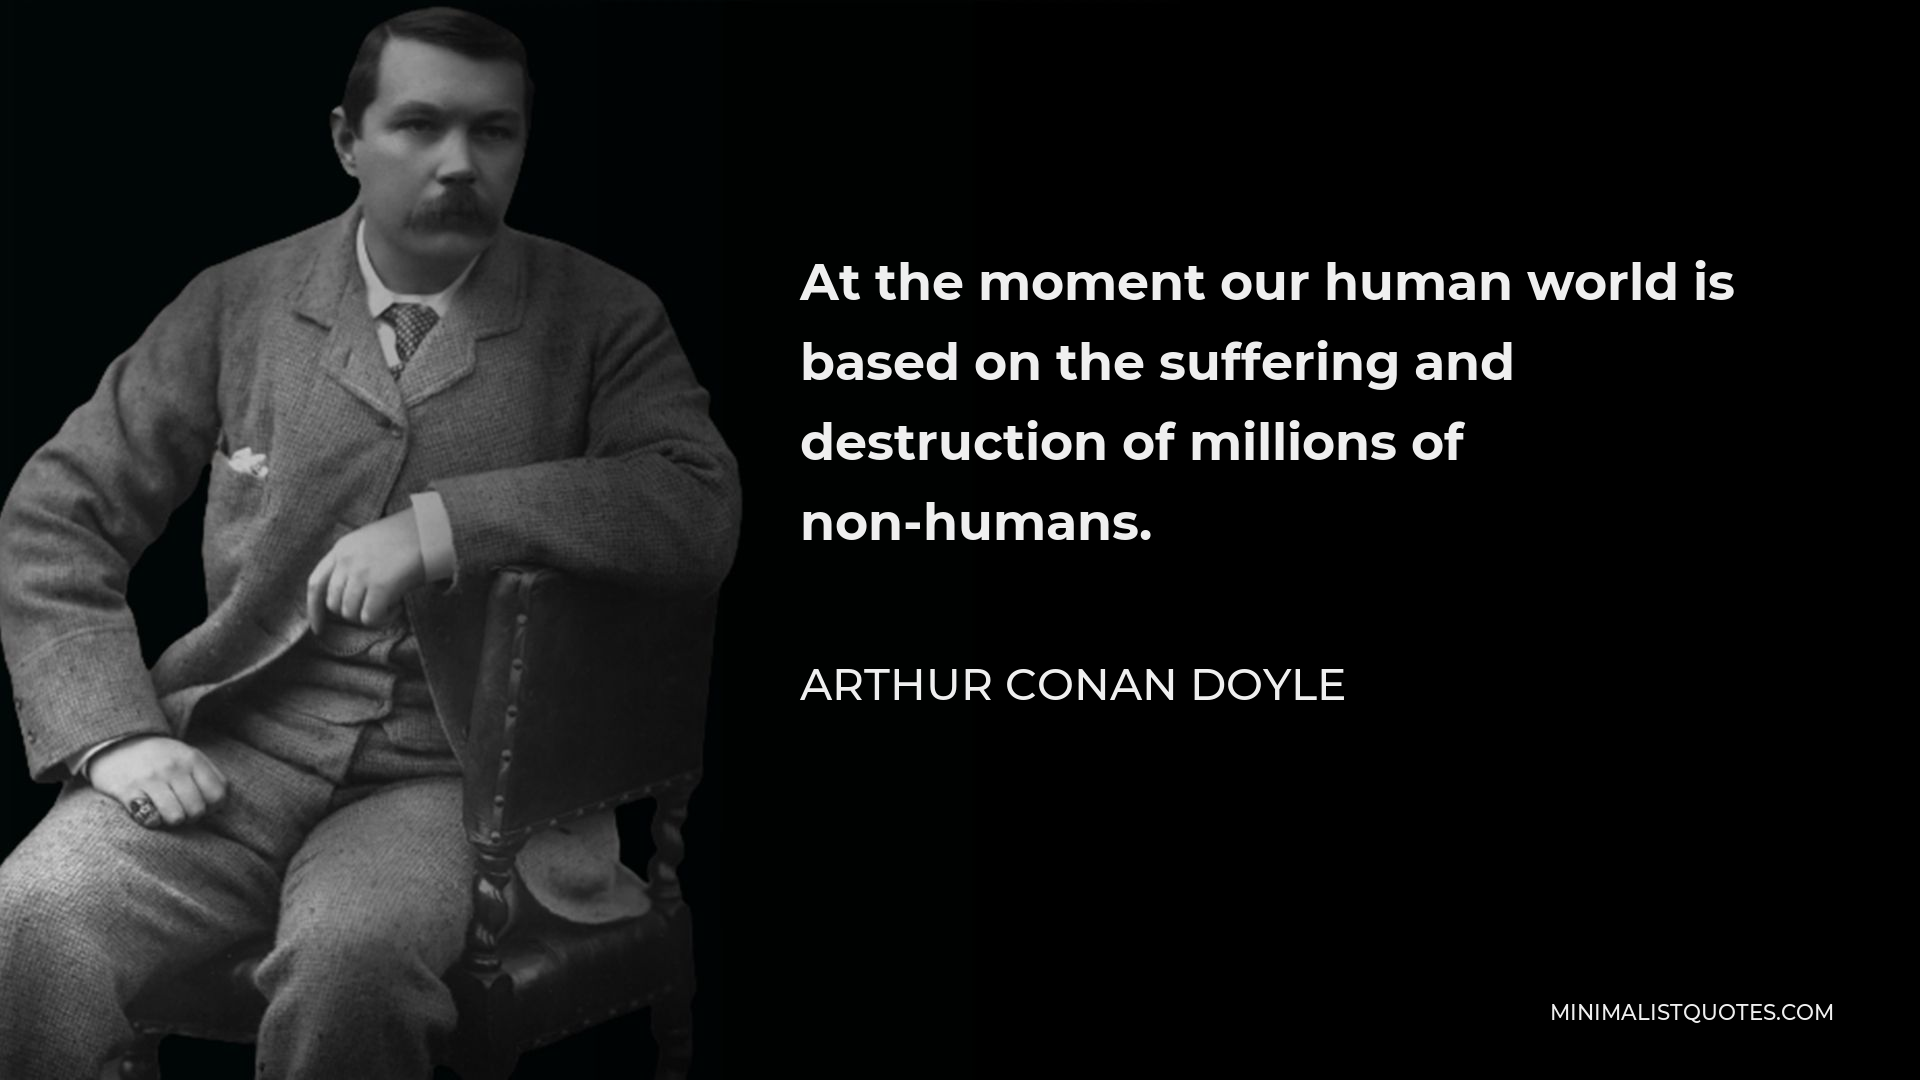 Arthur Conan Doyle Quote - At the moment our human world is based on the suffering and destruction of millions of non-humans.